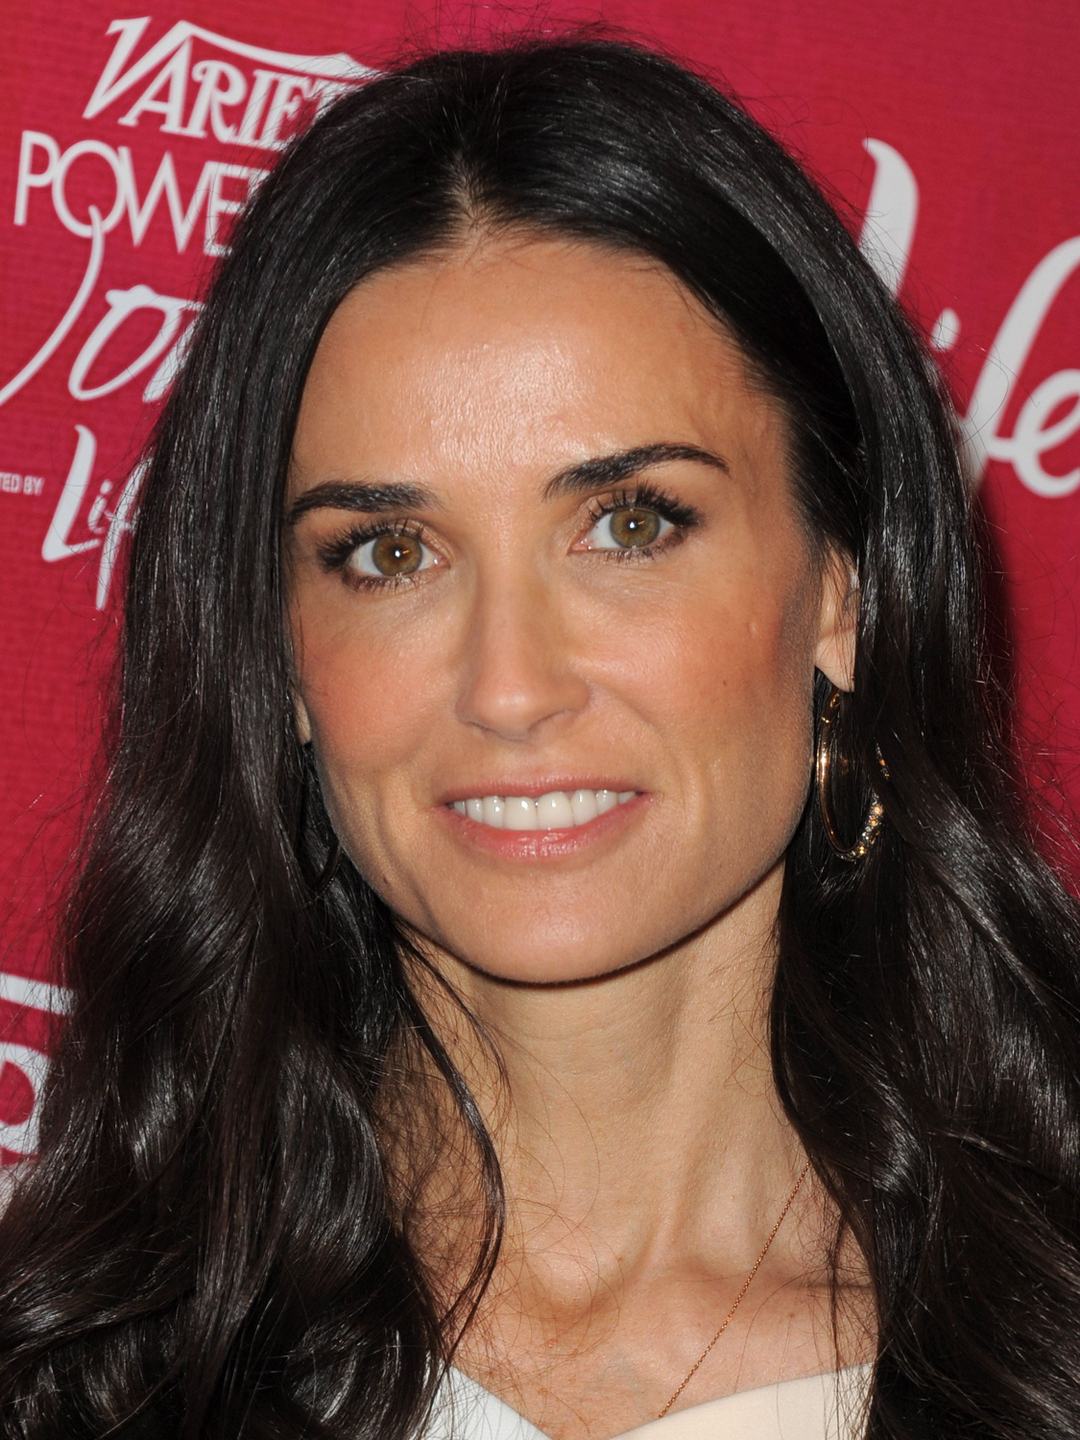 Demi Moore unphotoshopped pictures